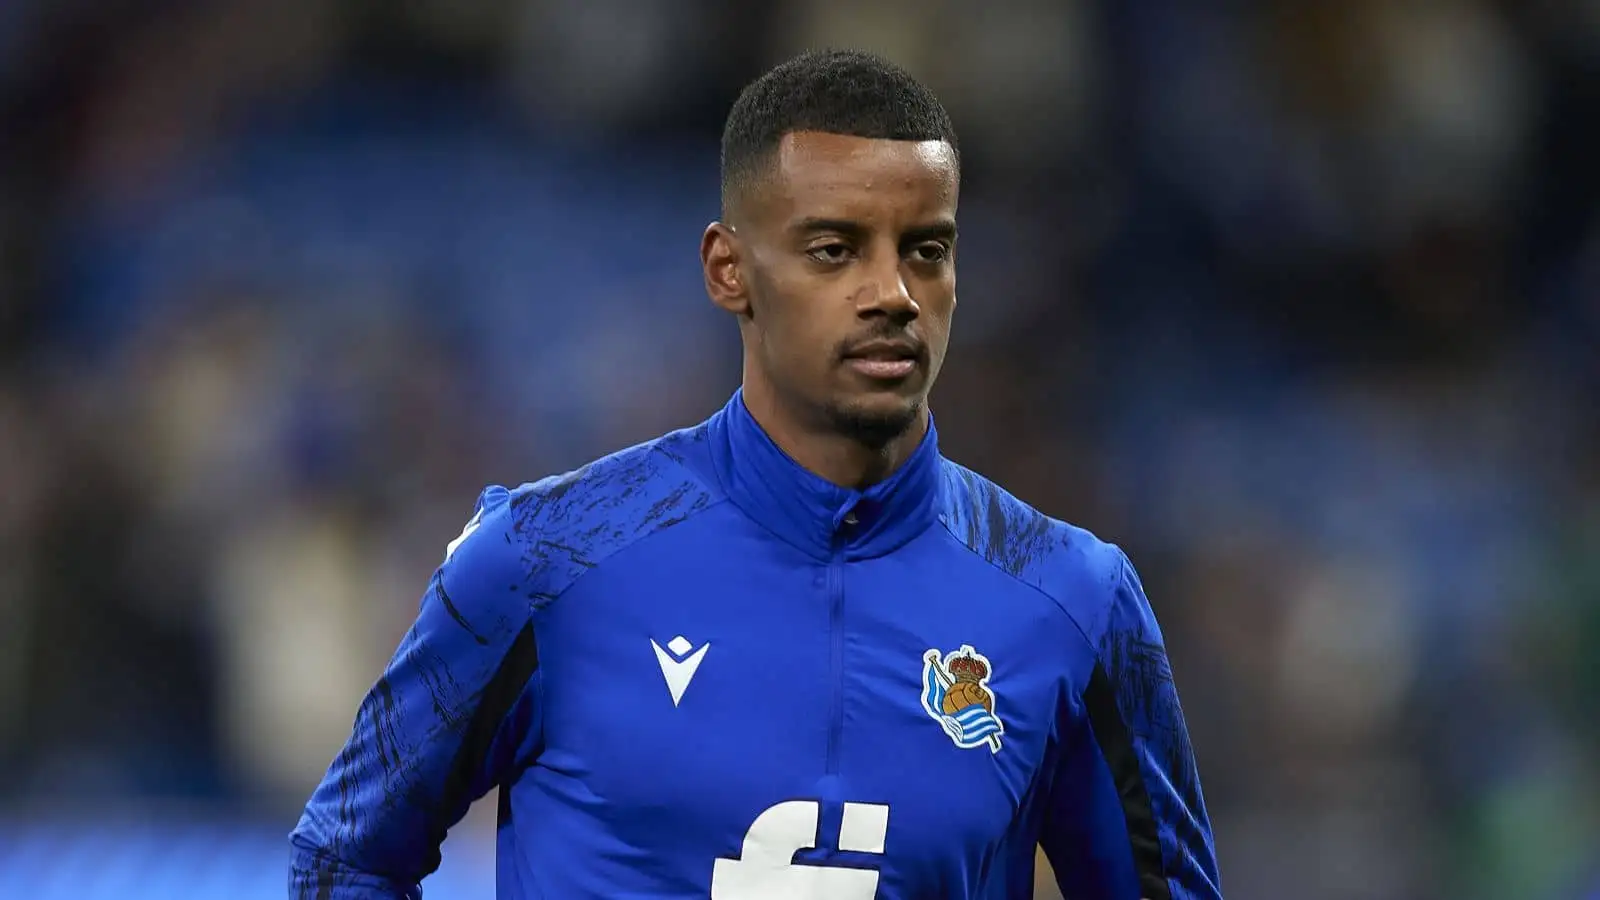 Pundit backs Newcastle to sign striker Alexander Isak who ‘will get fans off the edge of their seats’